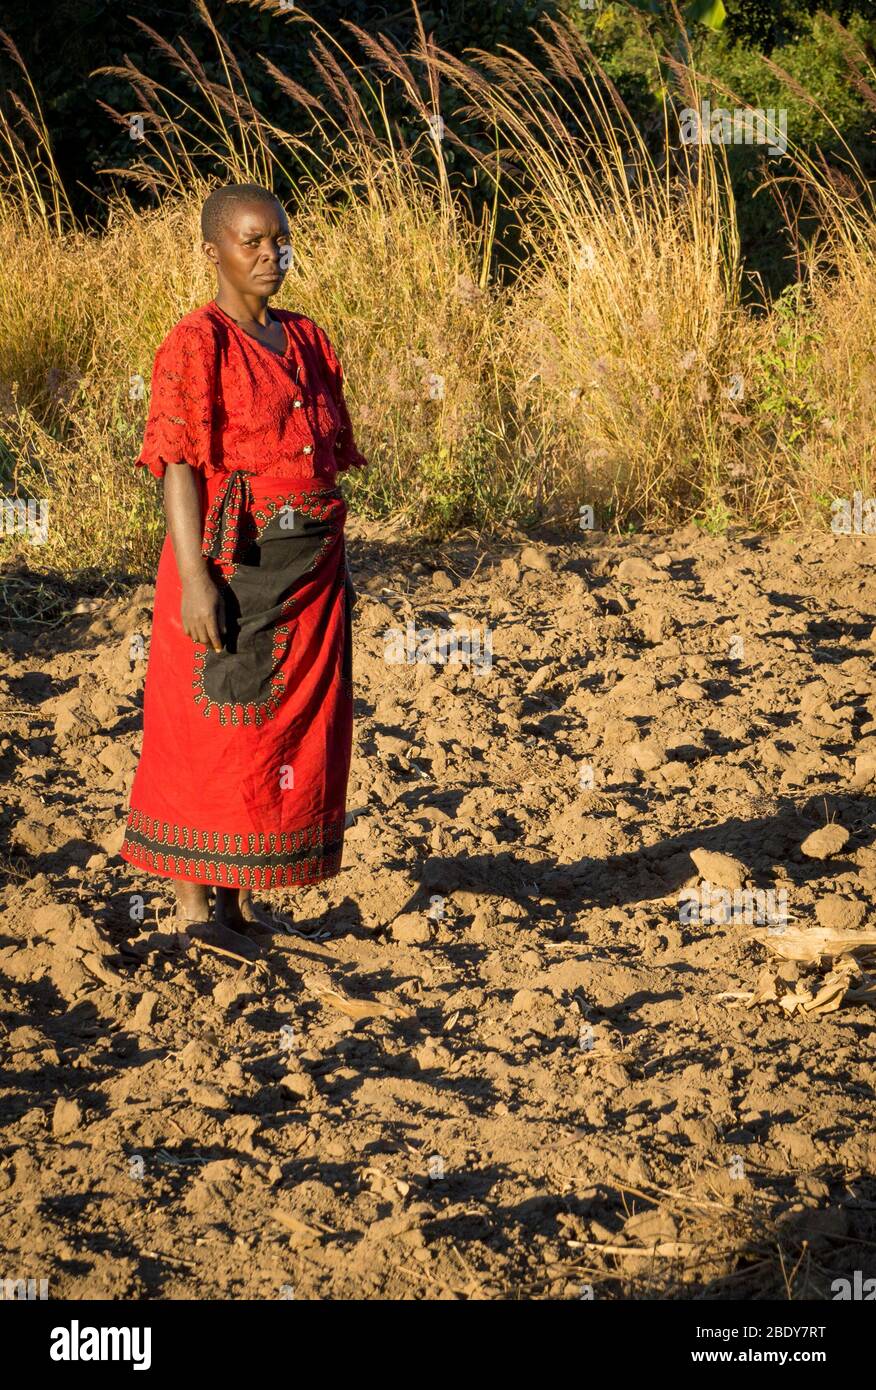 Subsistence farmer in northern Malawi standing in her conservation agriculture field Stock Photo